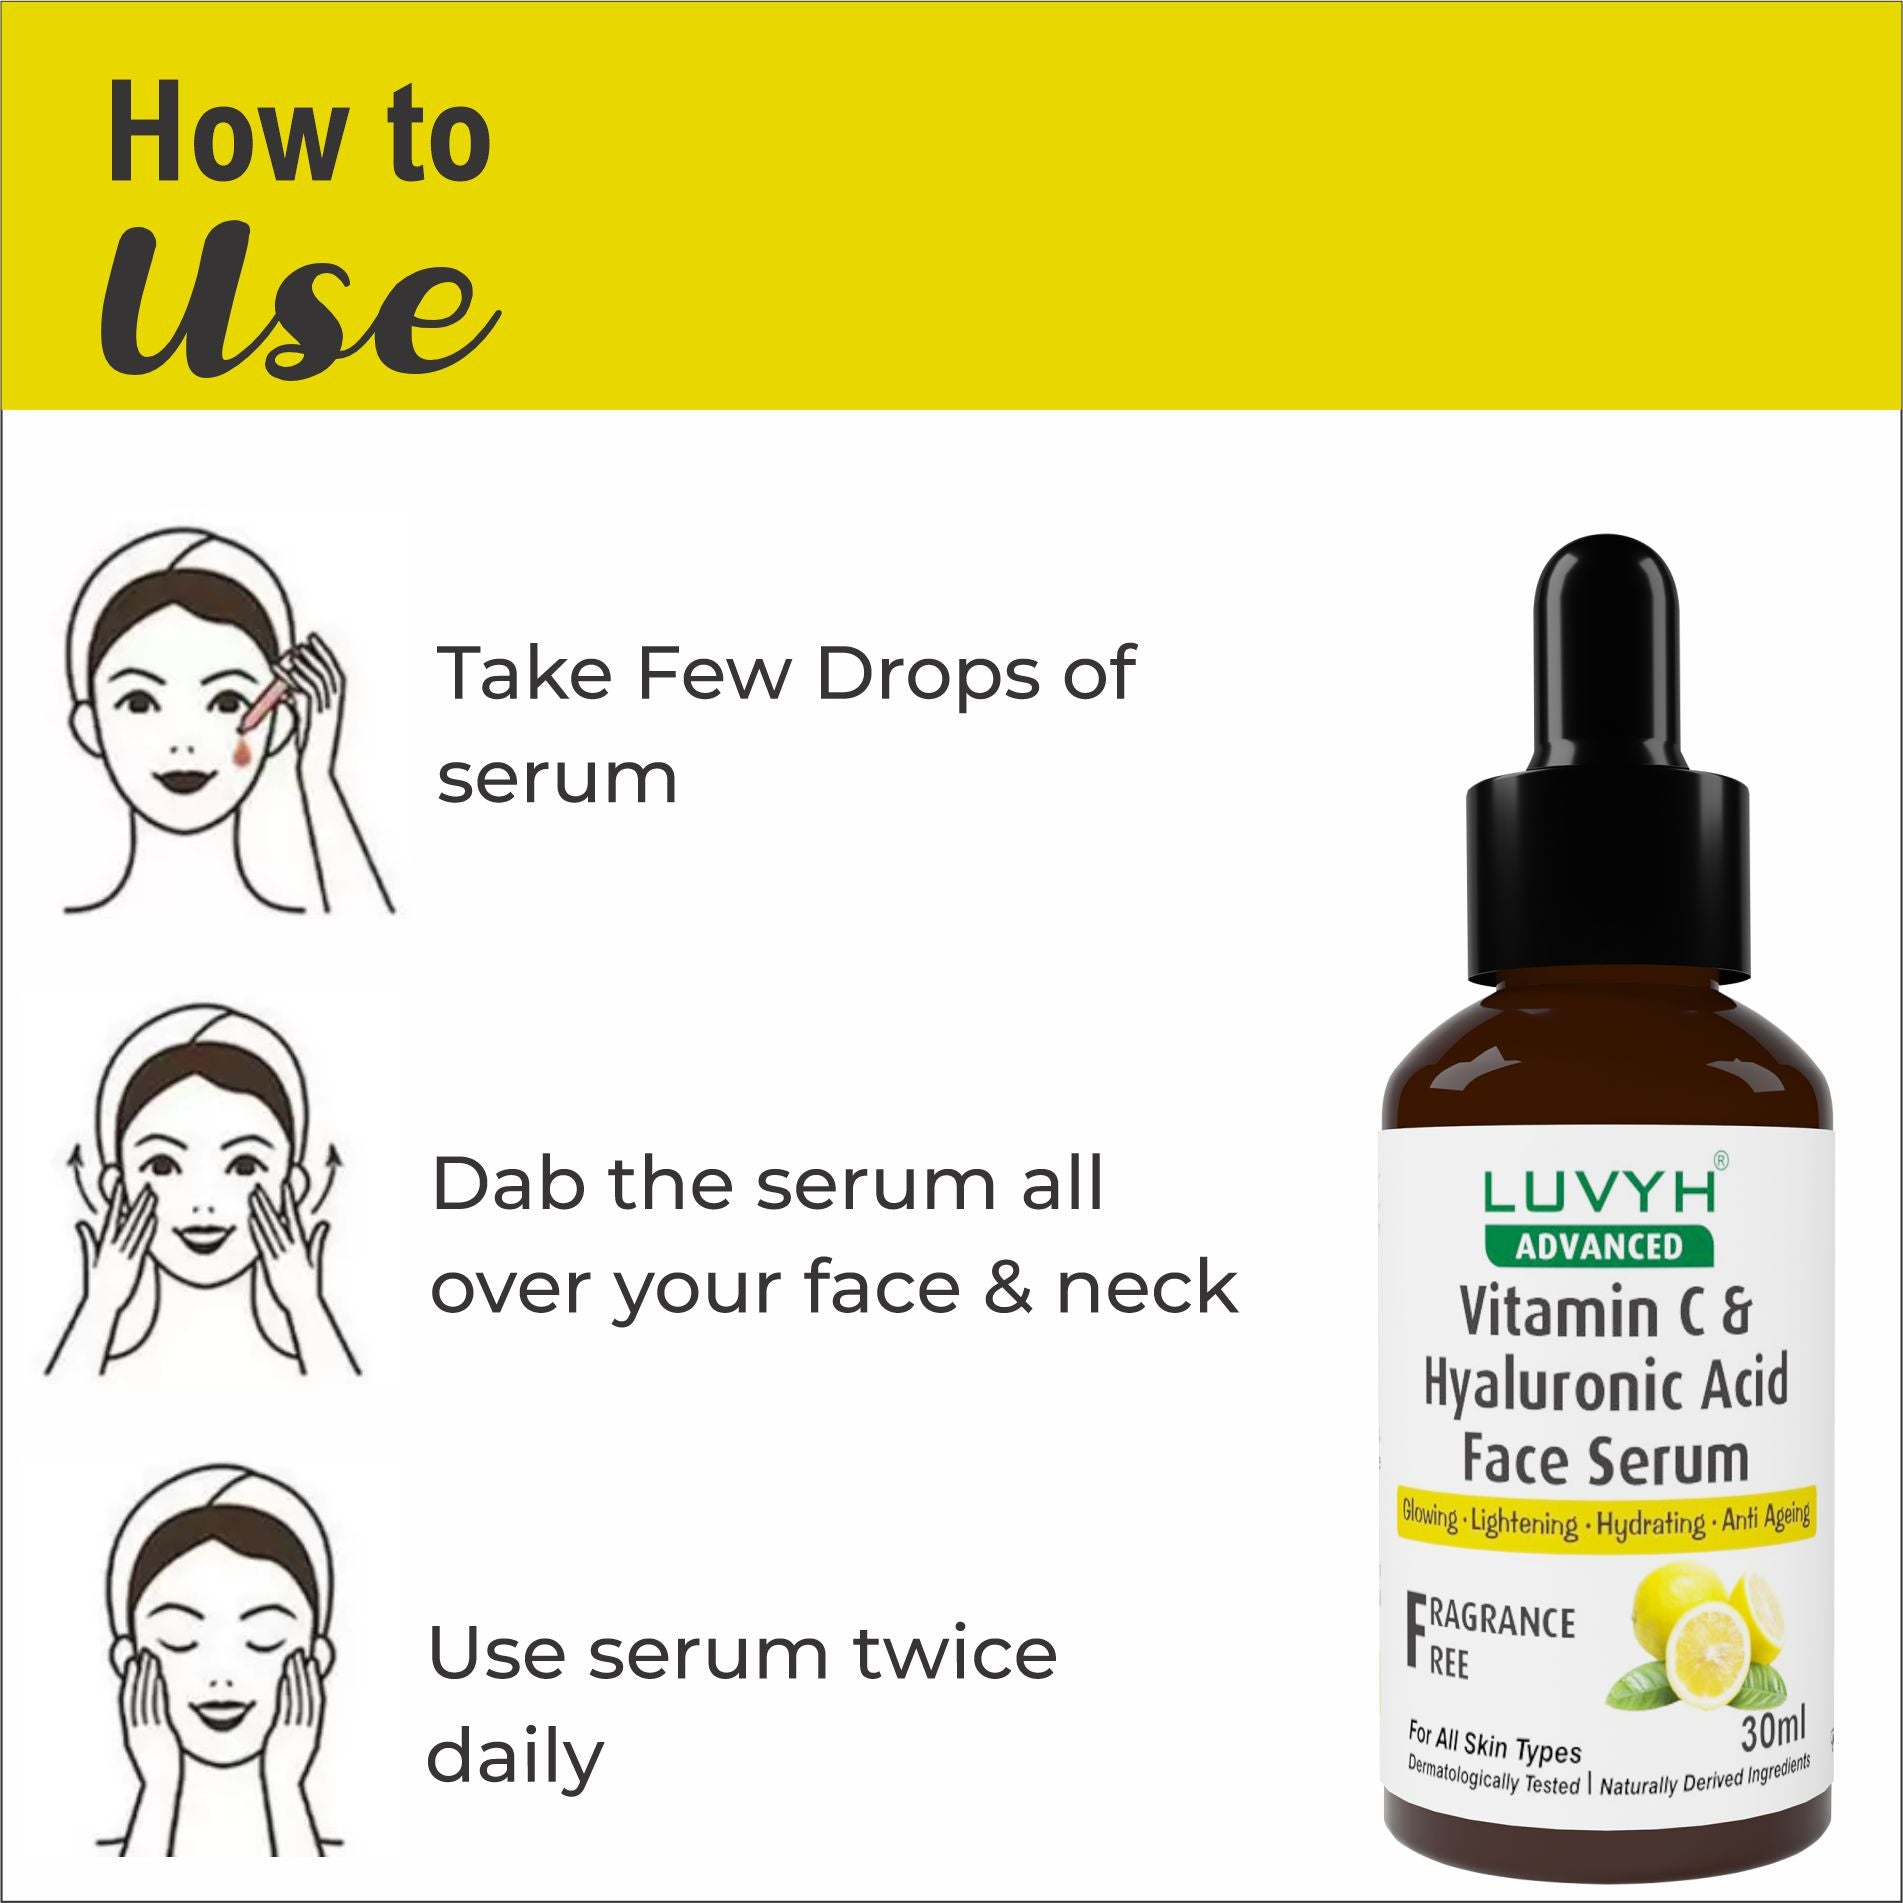 How to use  Vitamin C & Hyaluronic Acid Face Serum